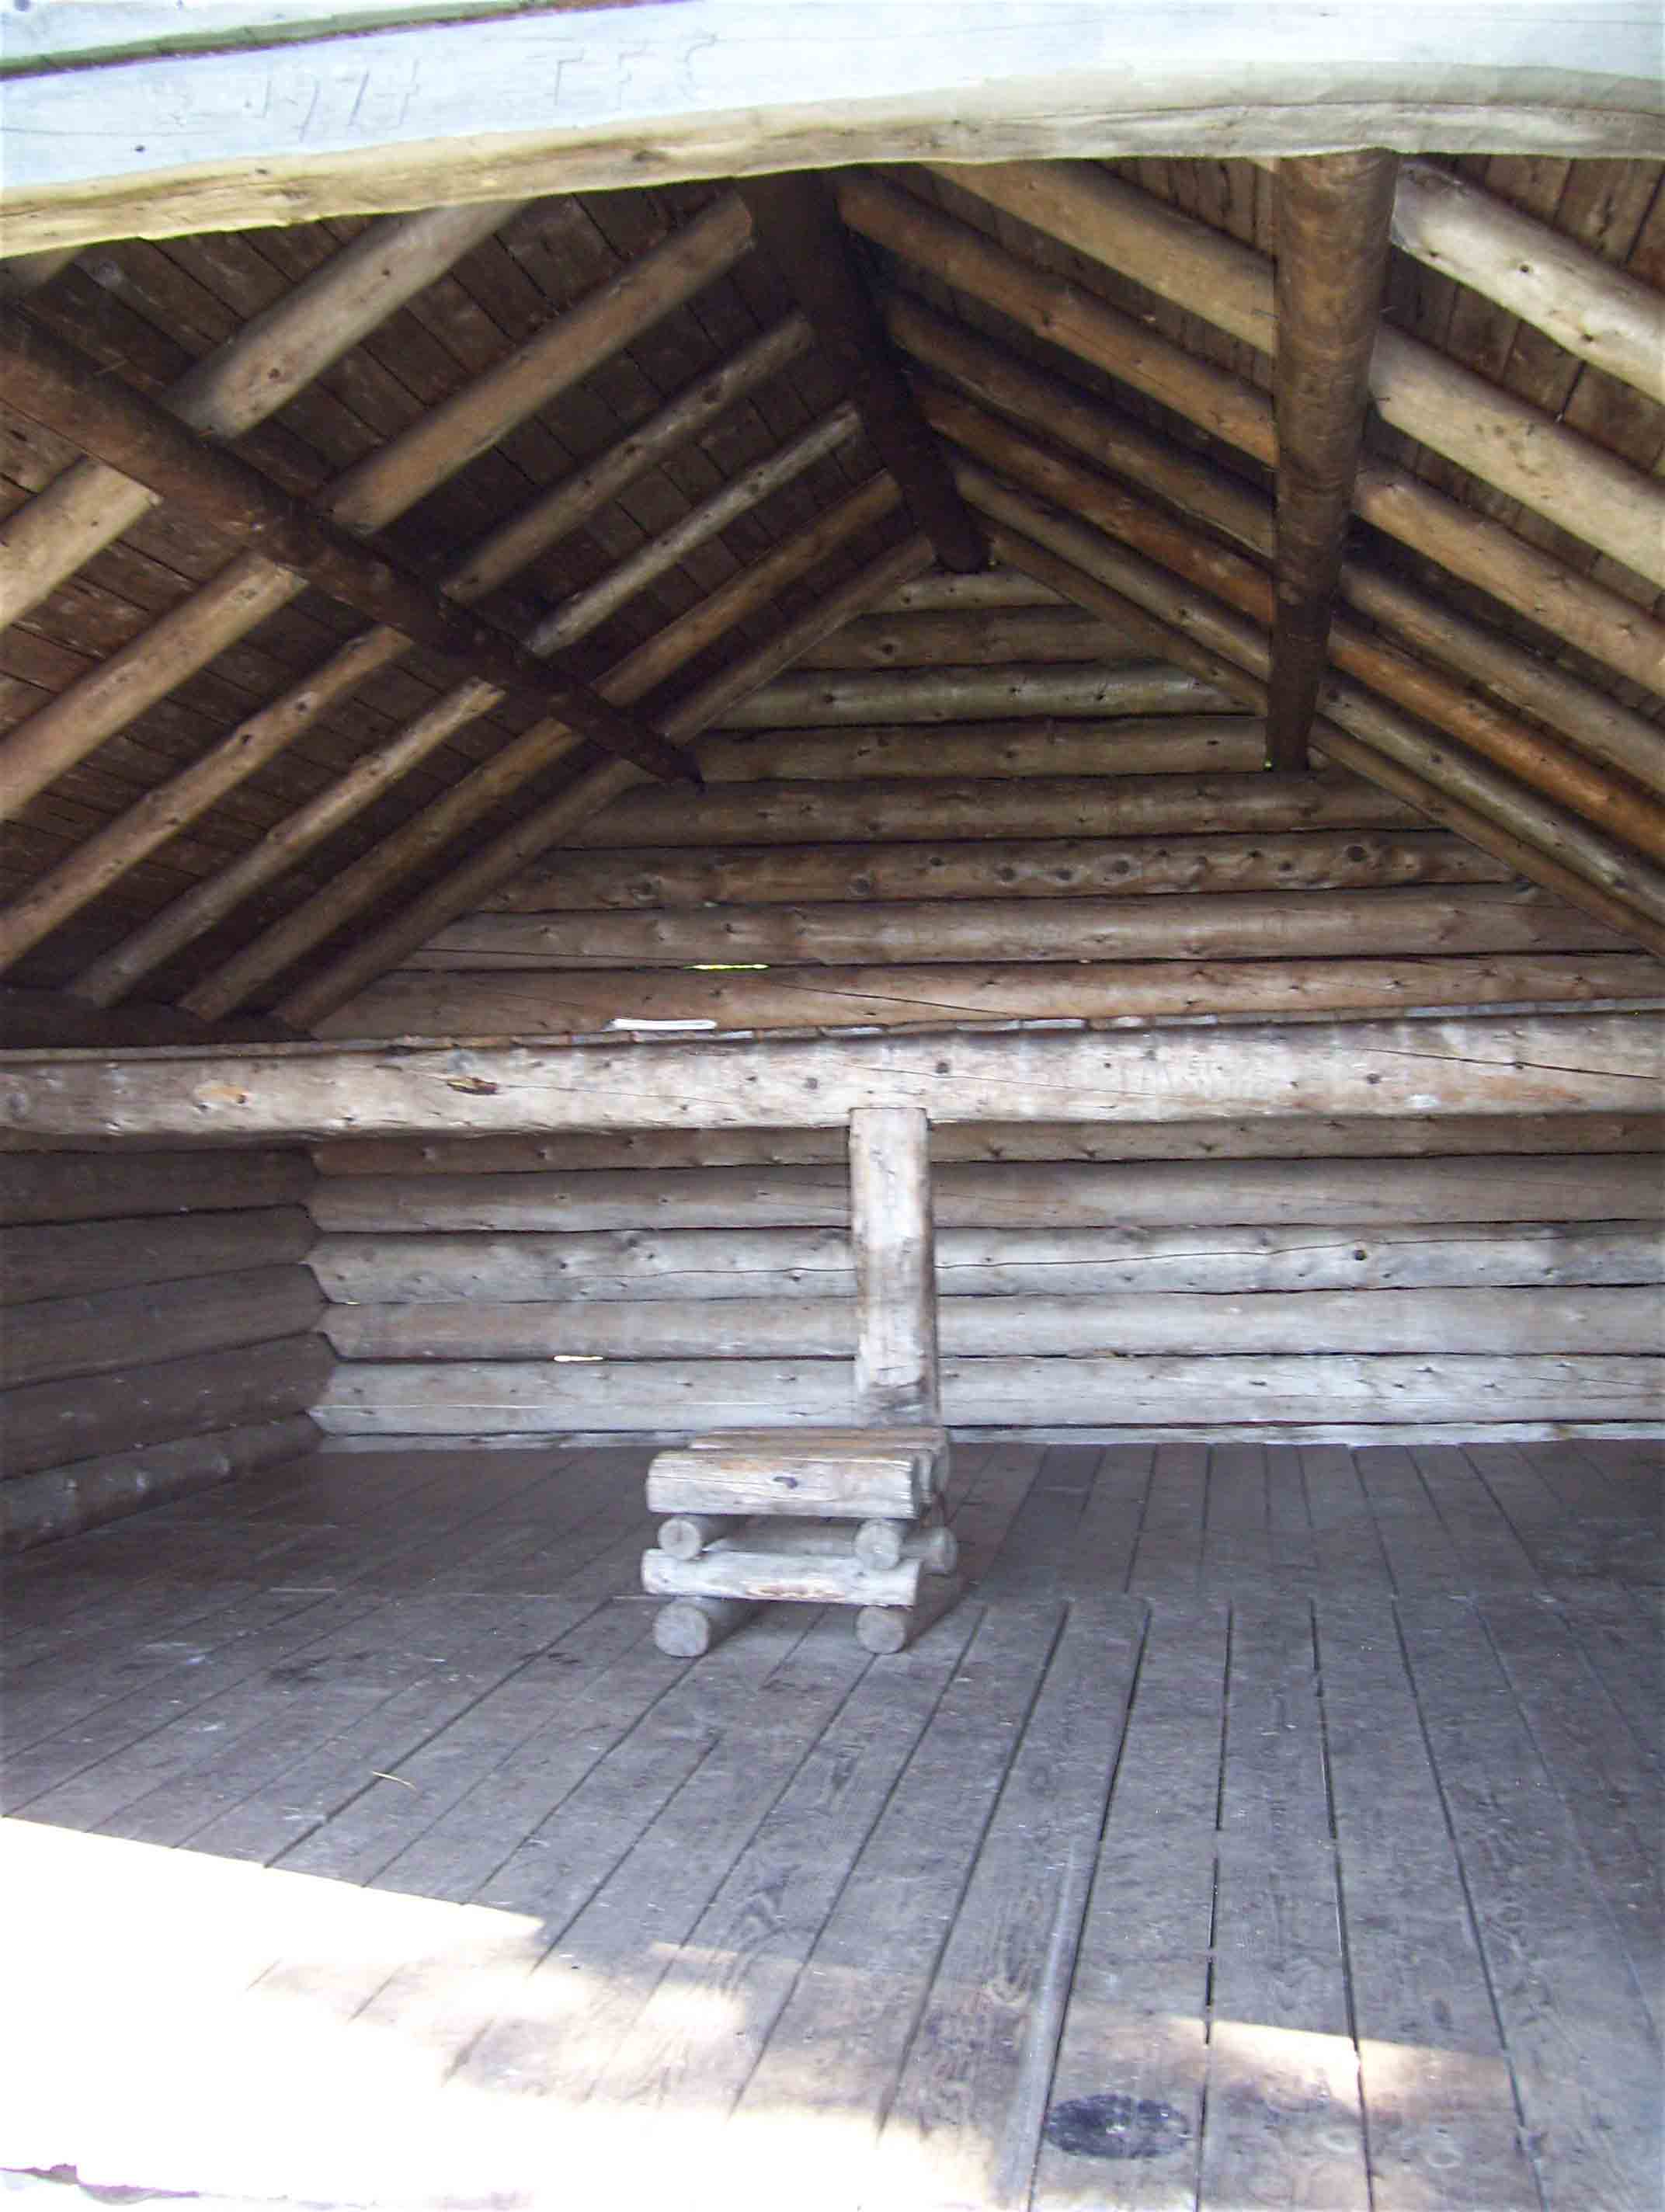 mm 4.7 Interior of the Genetian Pond Shelter.  Courtesy dlcul@conncoll.edu